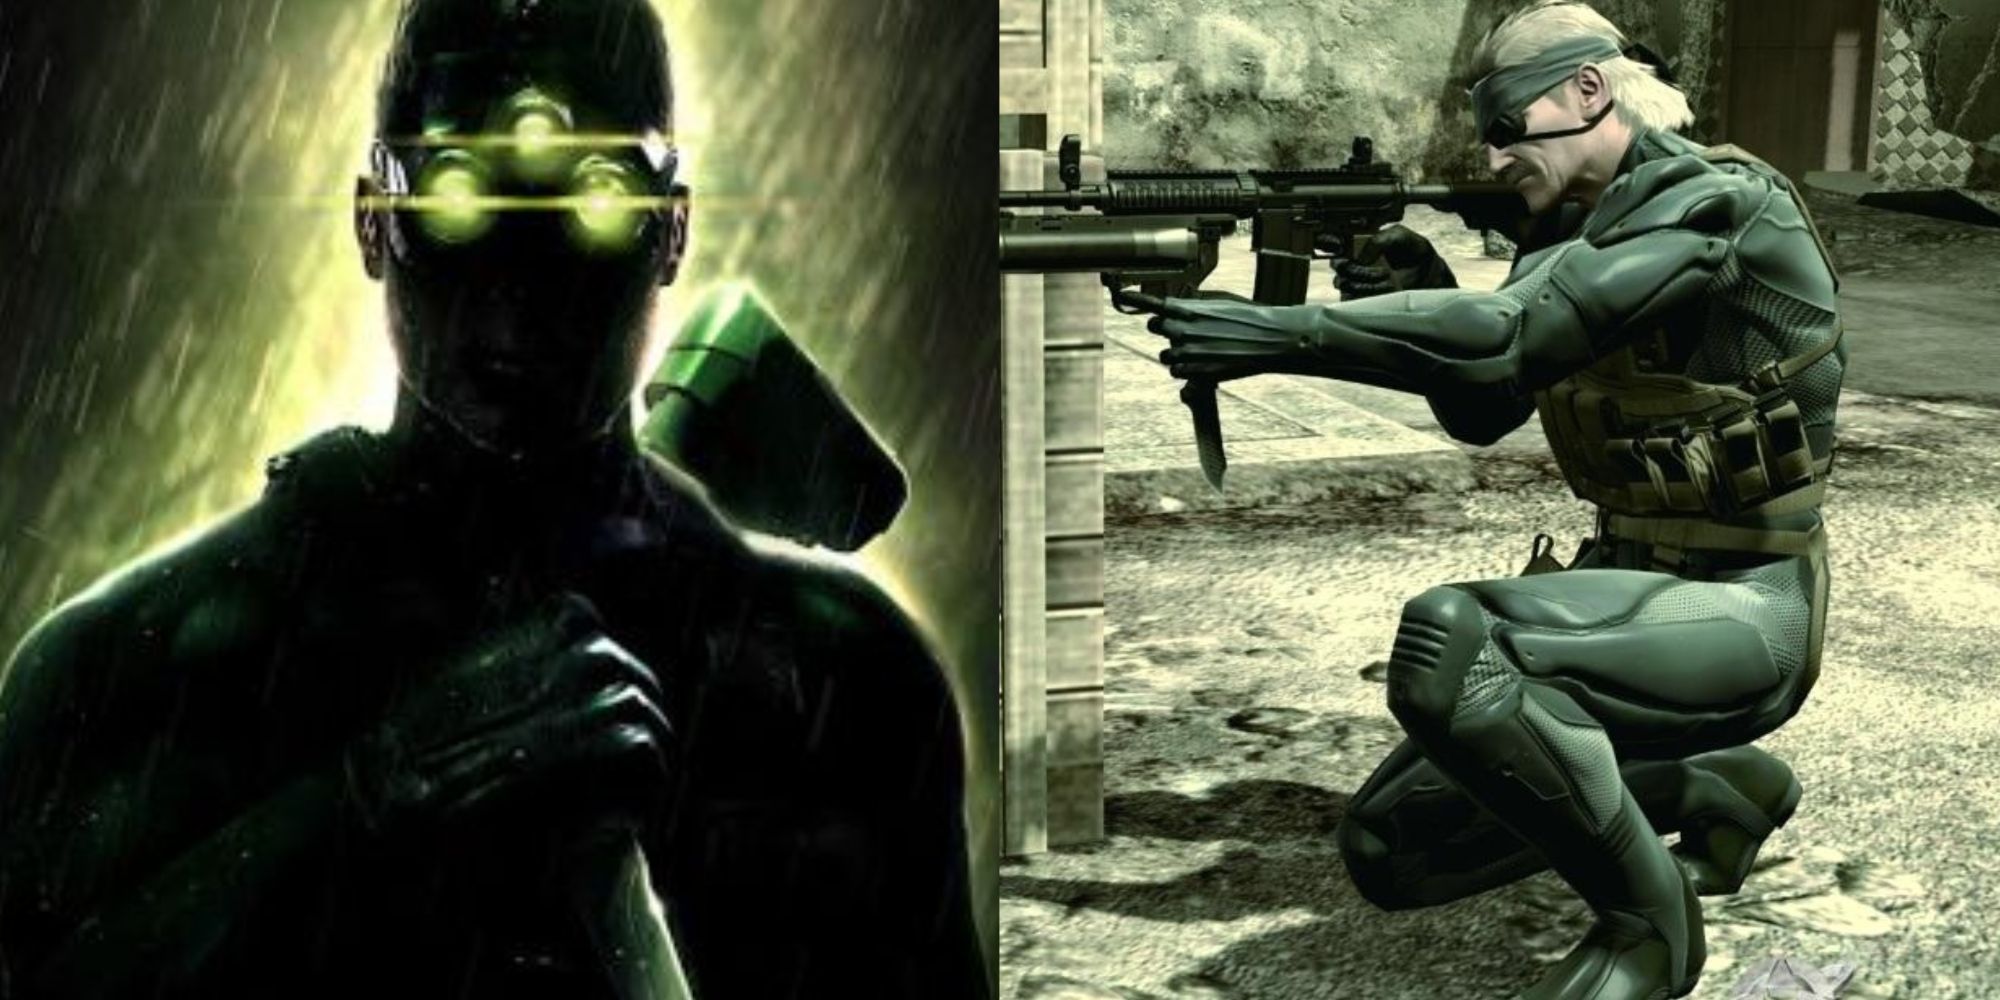 10 Best Stealth Games of All Time, According To Metacritic